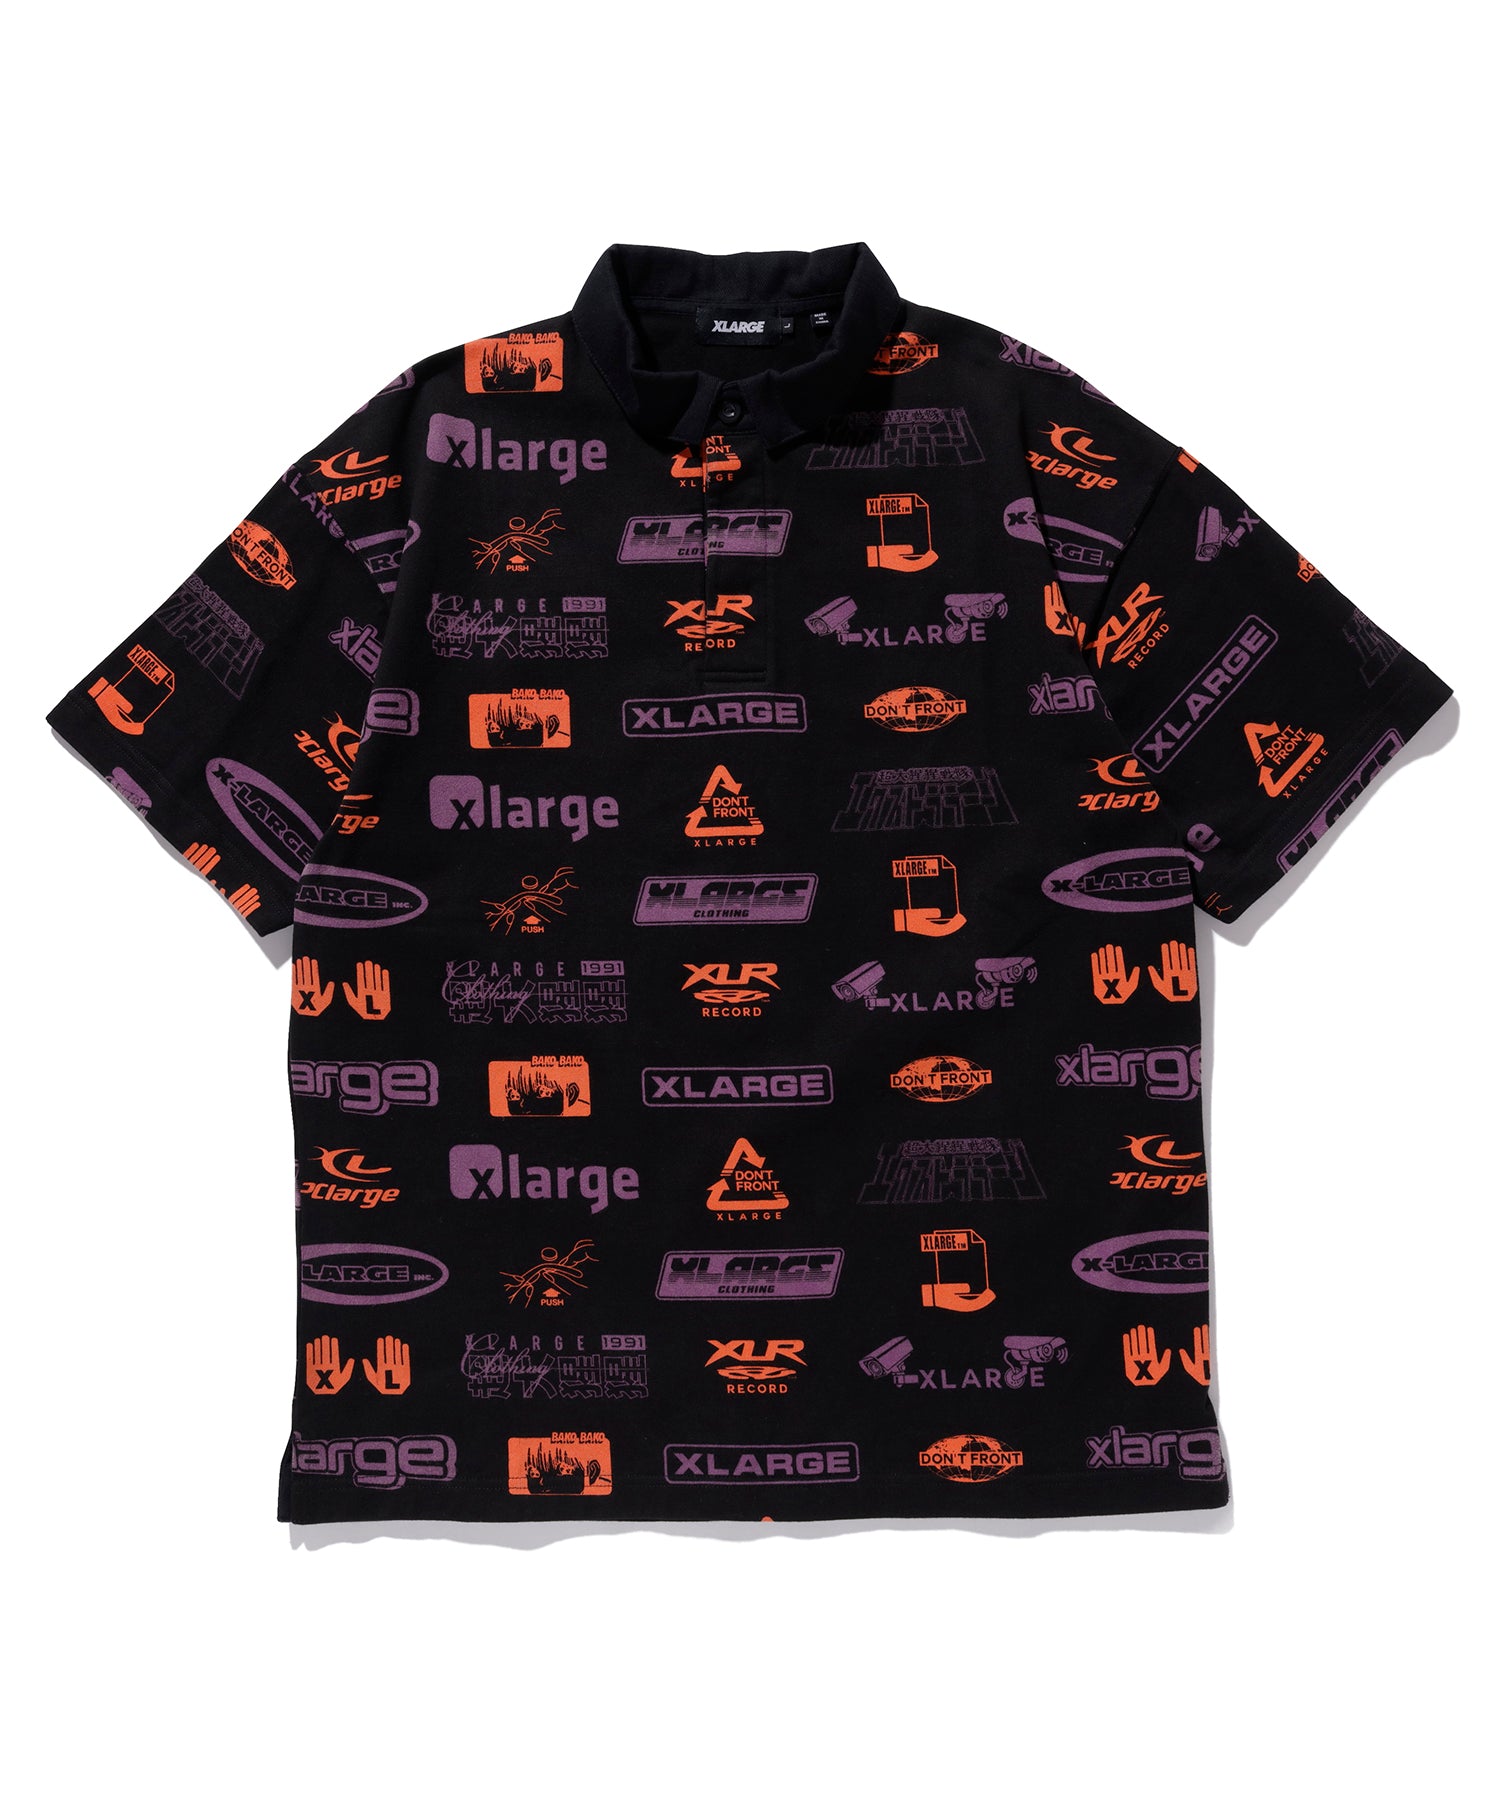 S/S ALLOVER PRINT RUGBY SHIRT KNITS XLARGE  